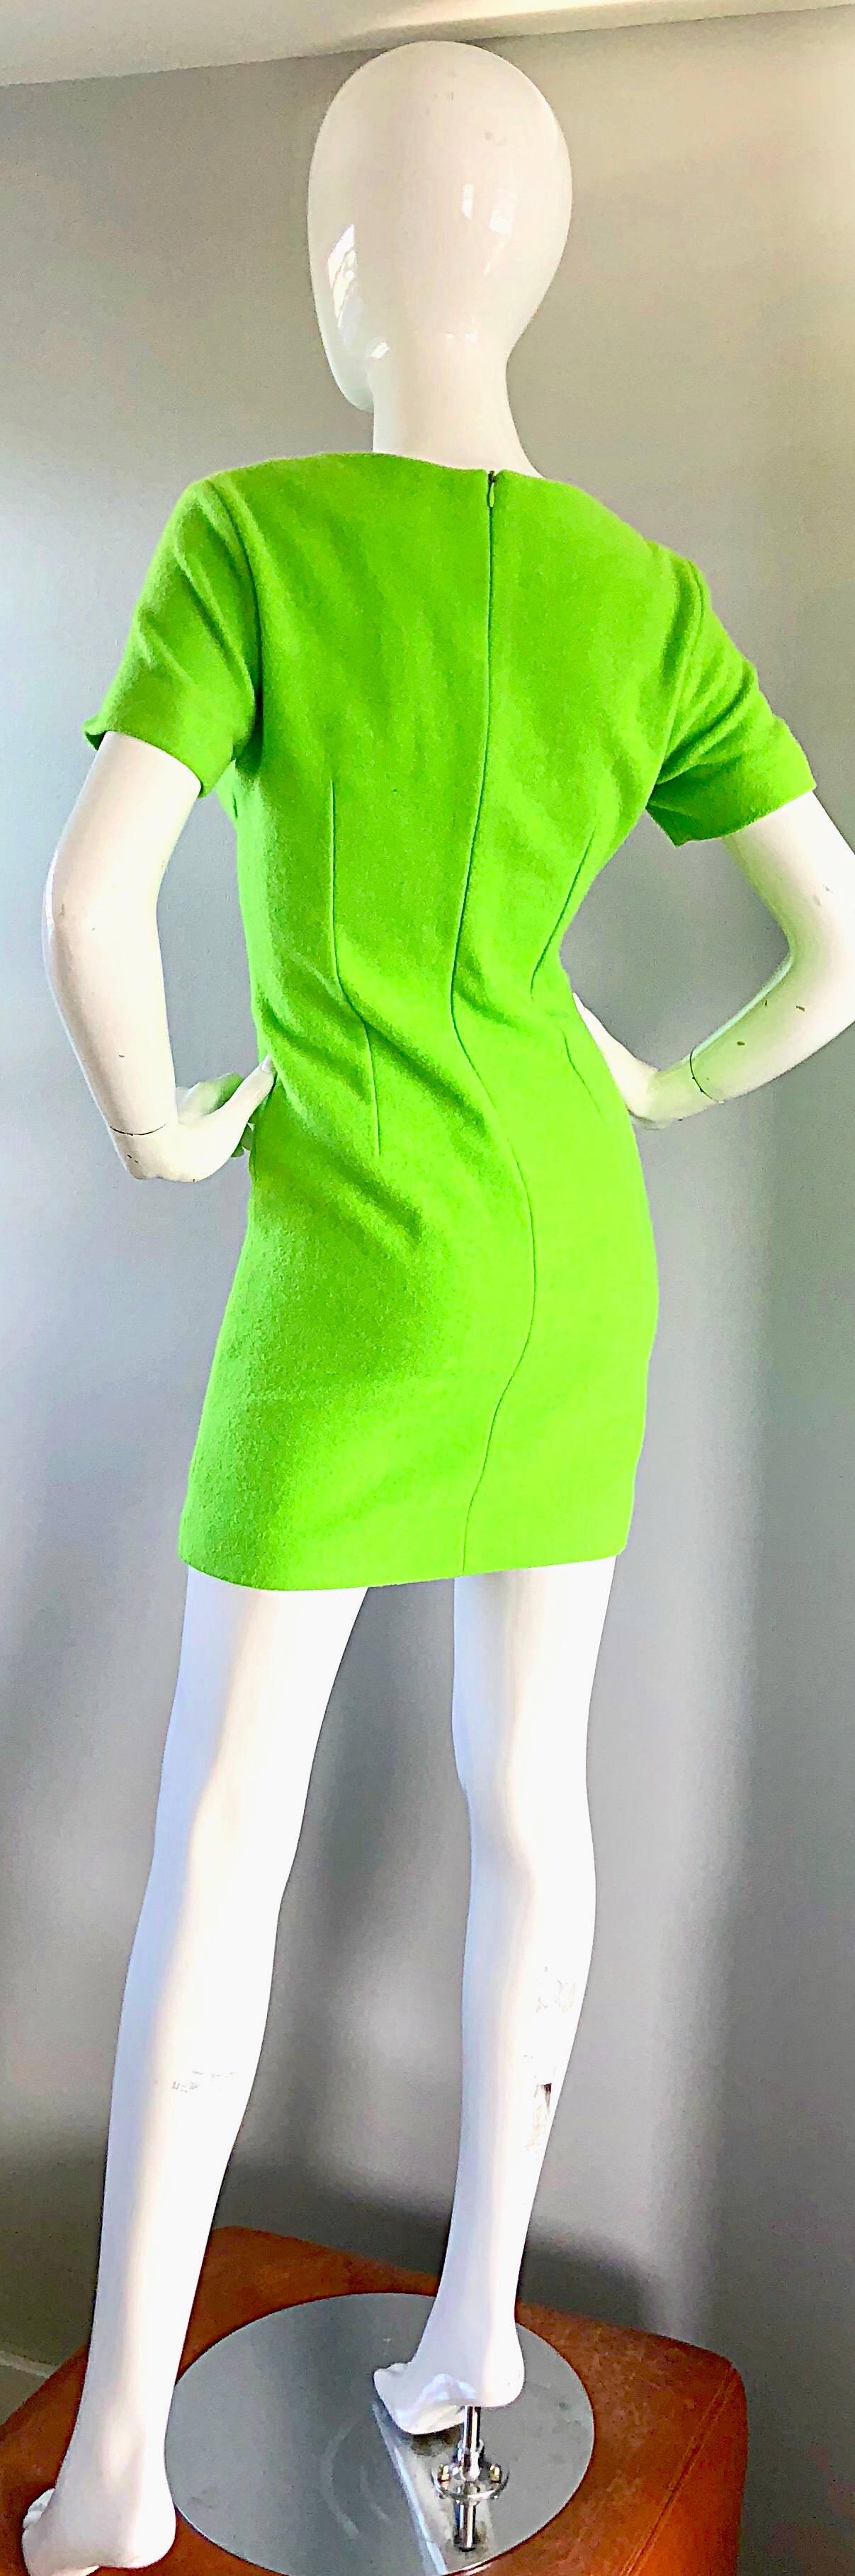 1990s Gianni Versace Neon Lime Green Bodycon Wool Vintage 90s Mini Dress For Sale 2